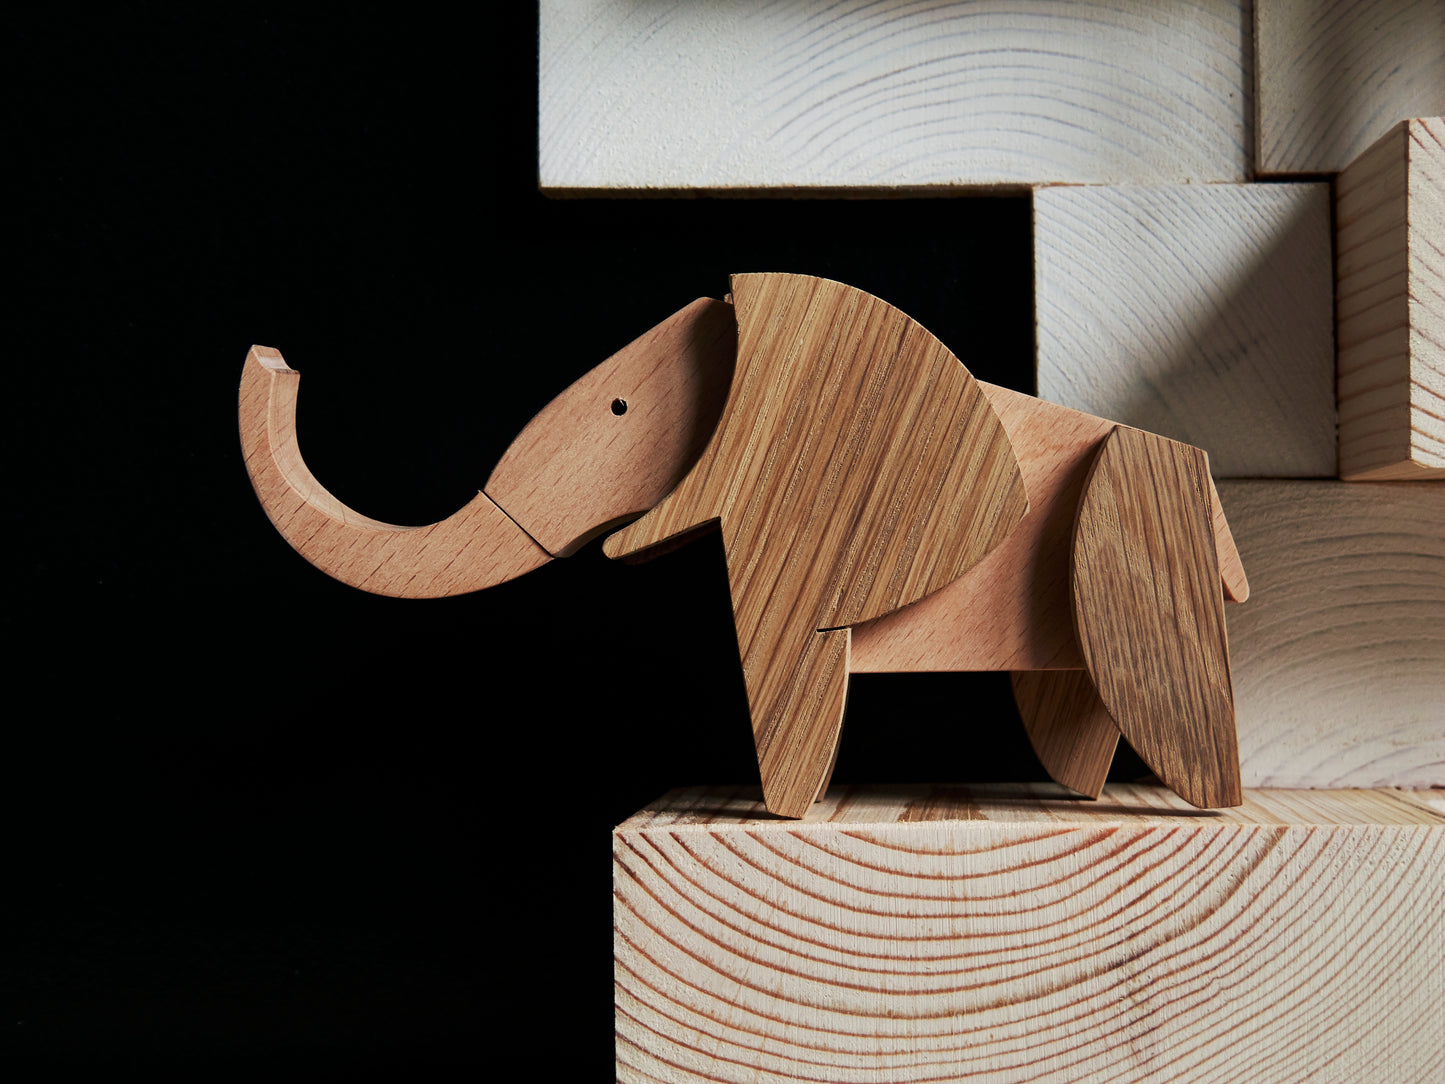 magnetic wooden toy elephant for kids and adults- against a dark background